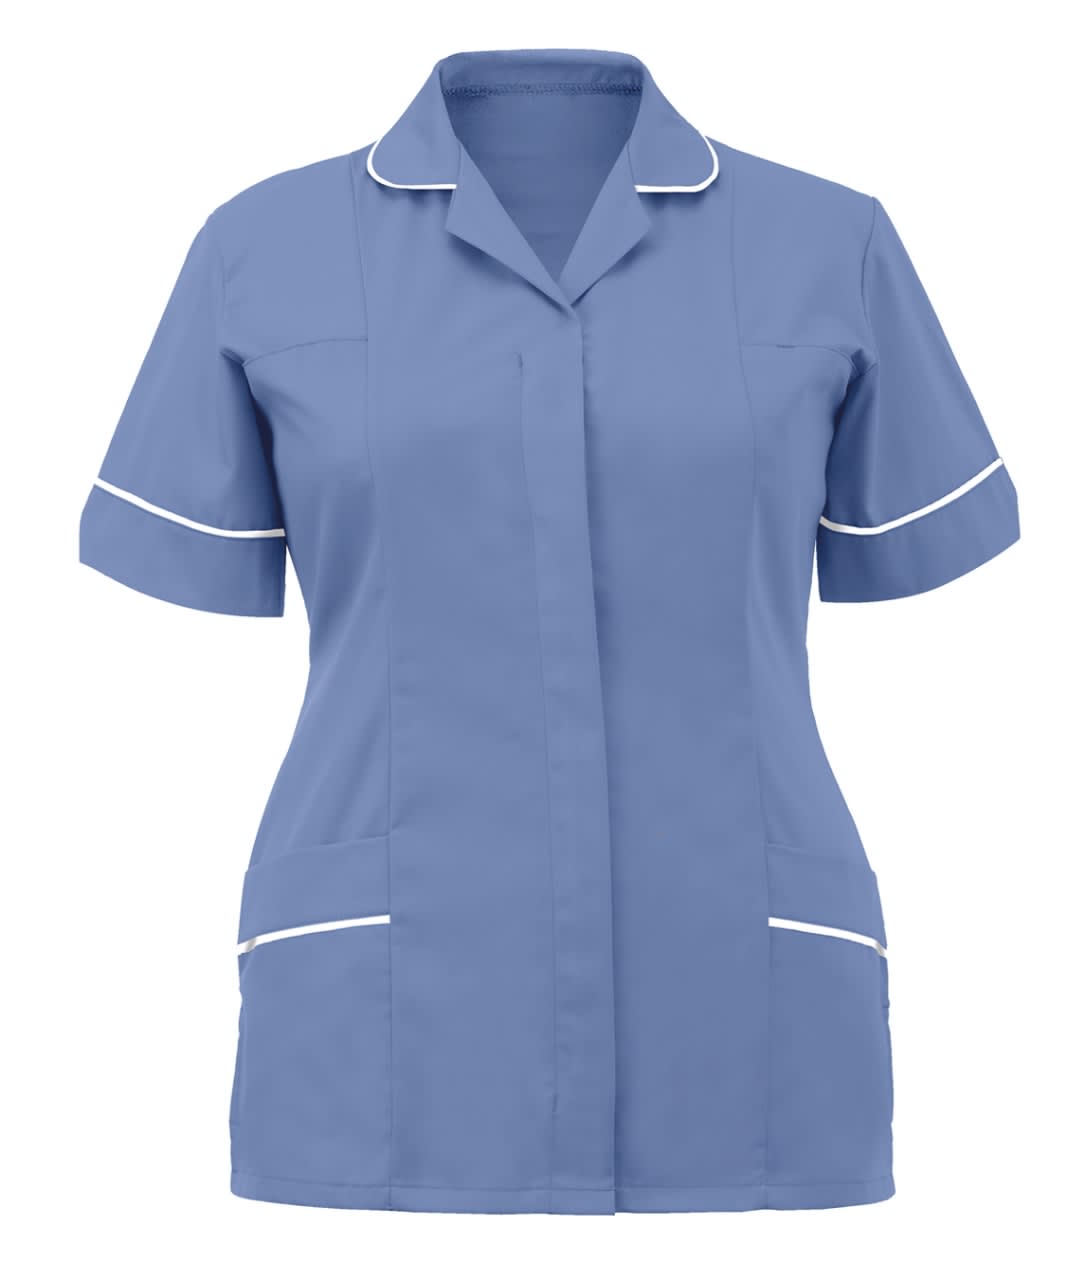 Images Health & Safety Workwear